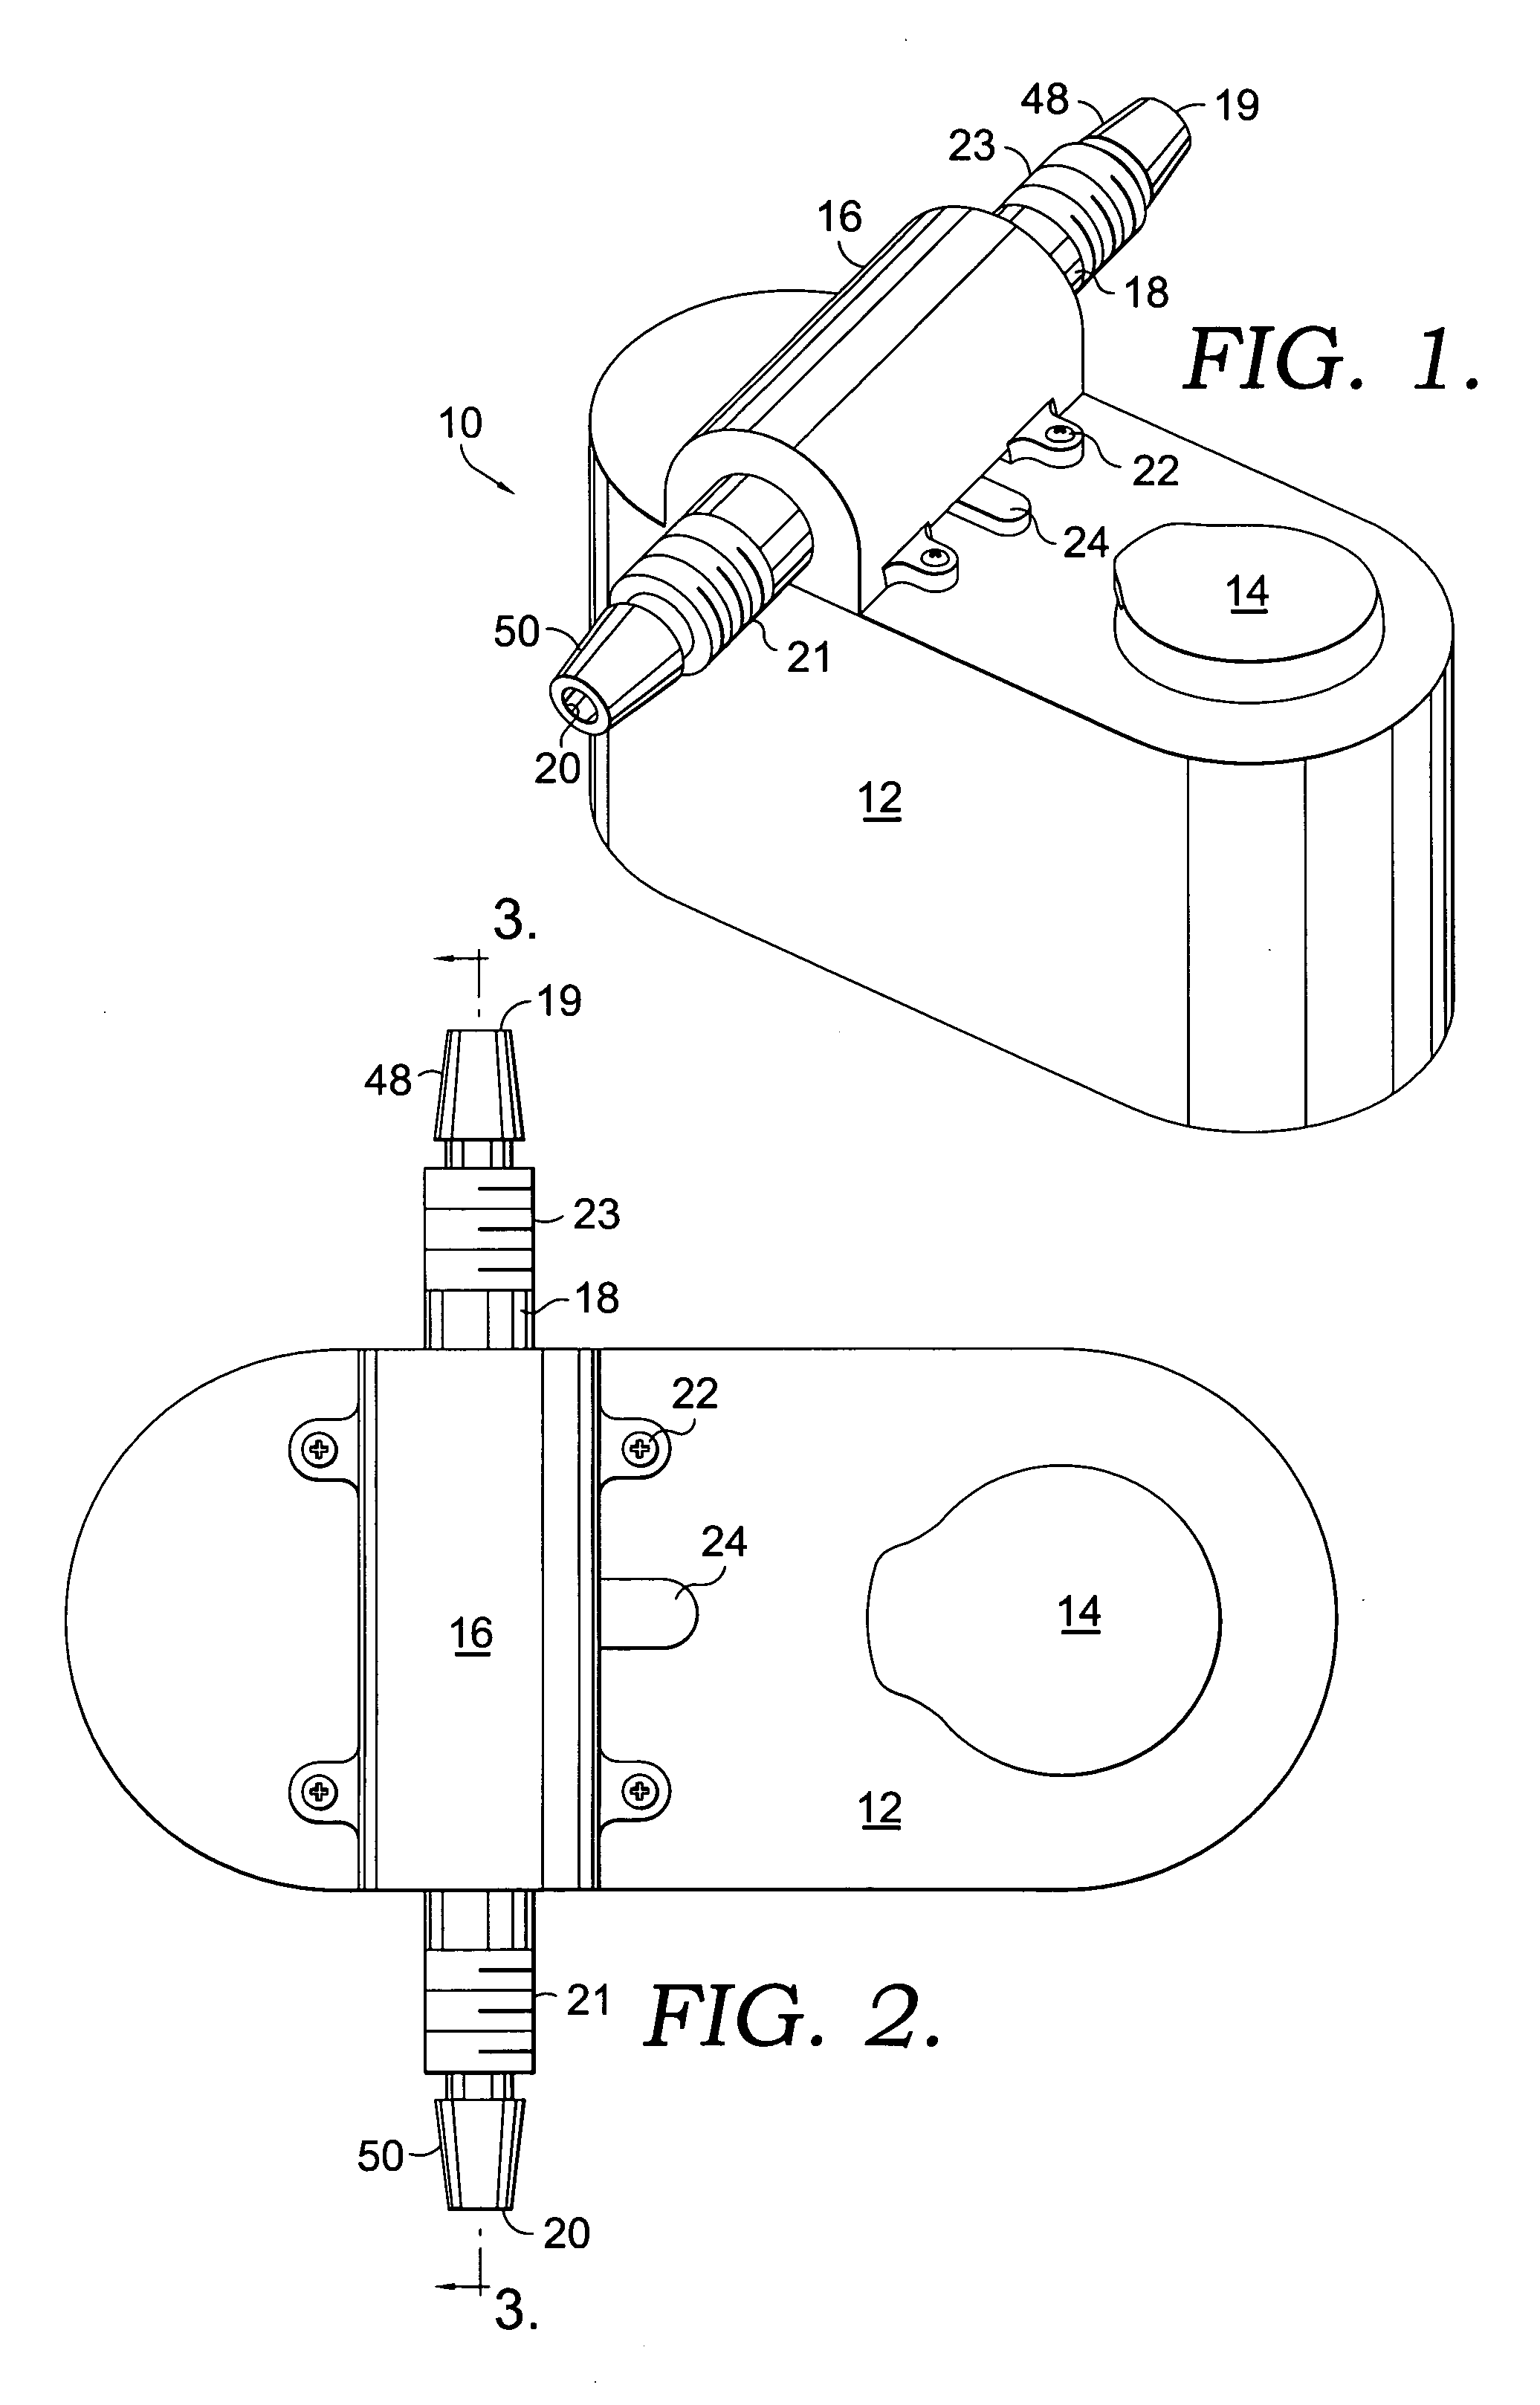 Chemical administrator for treating wastewater from a water-consuming device in a self-contained bathroom system